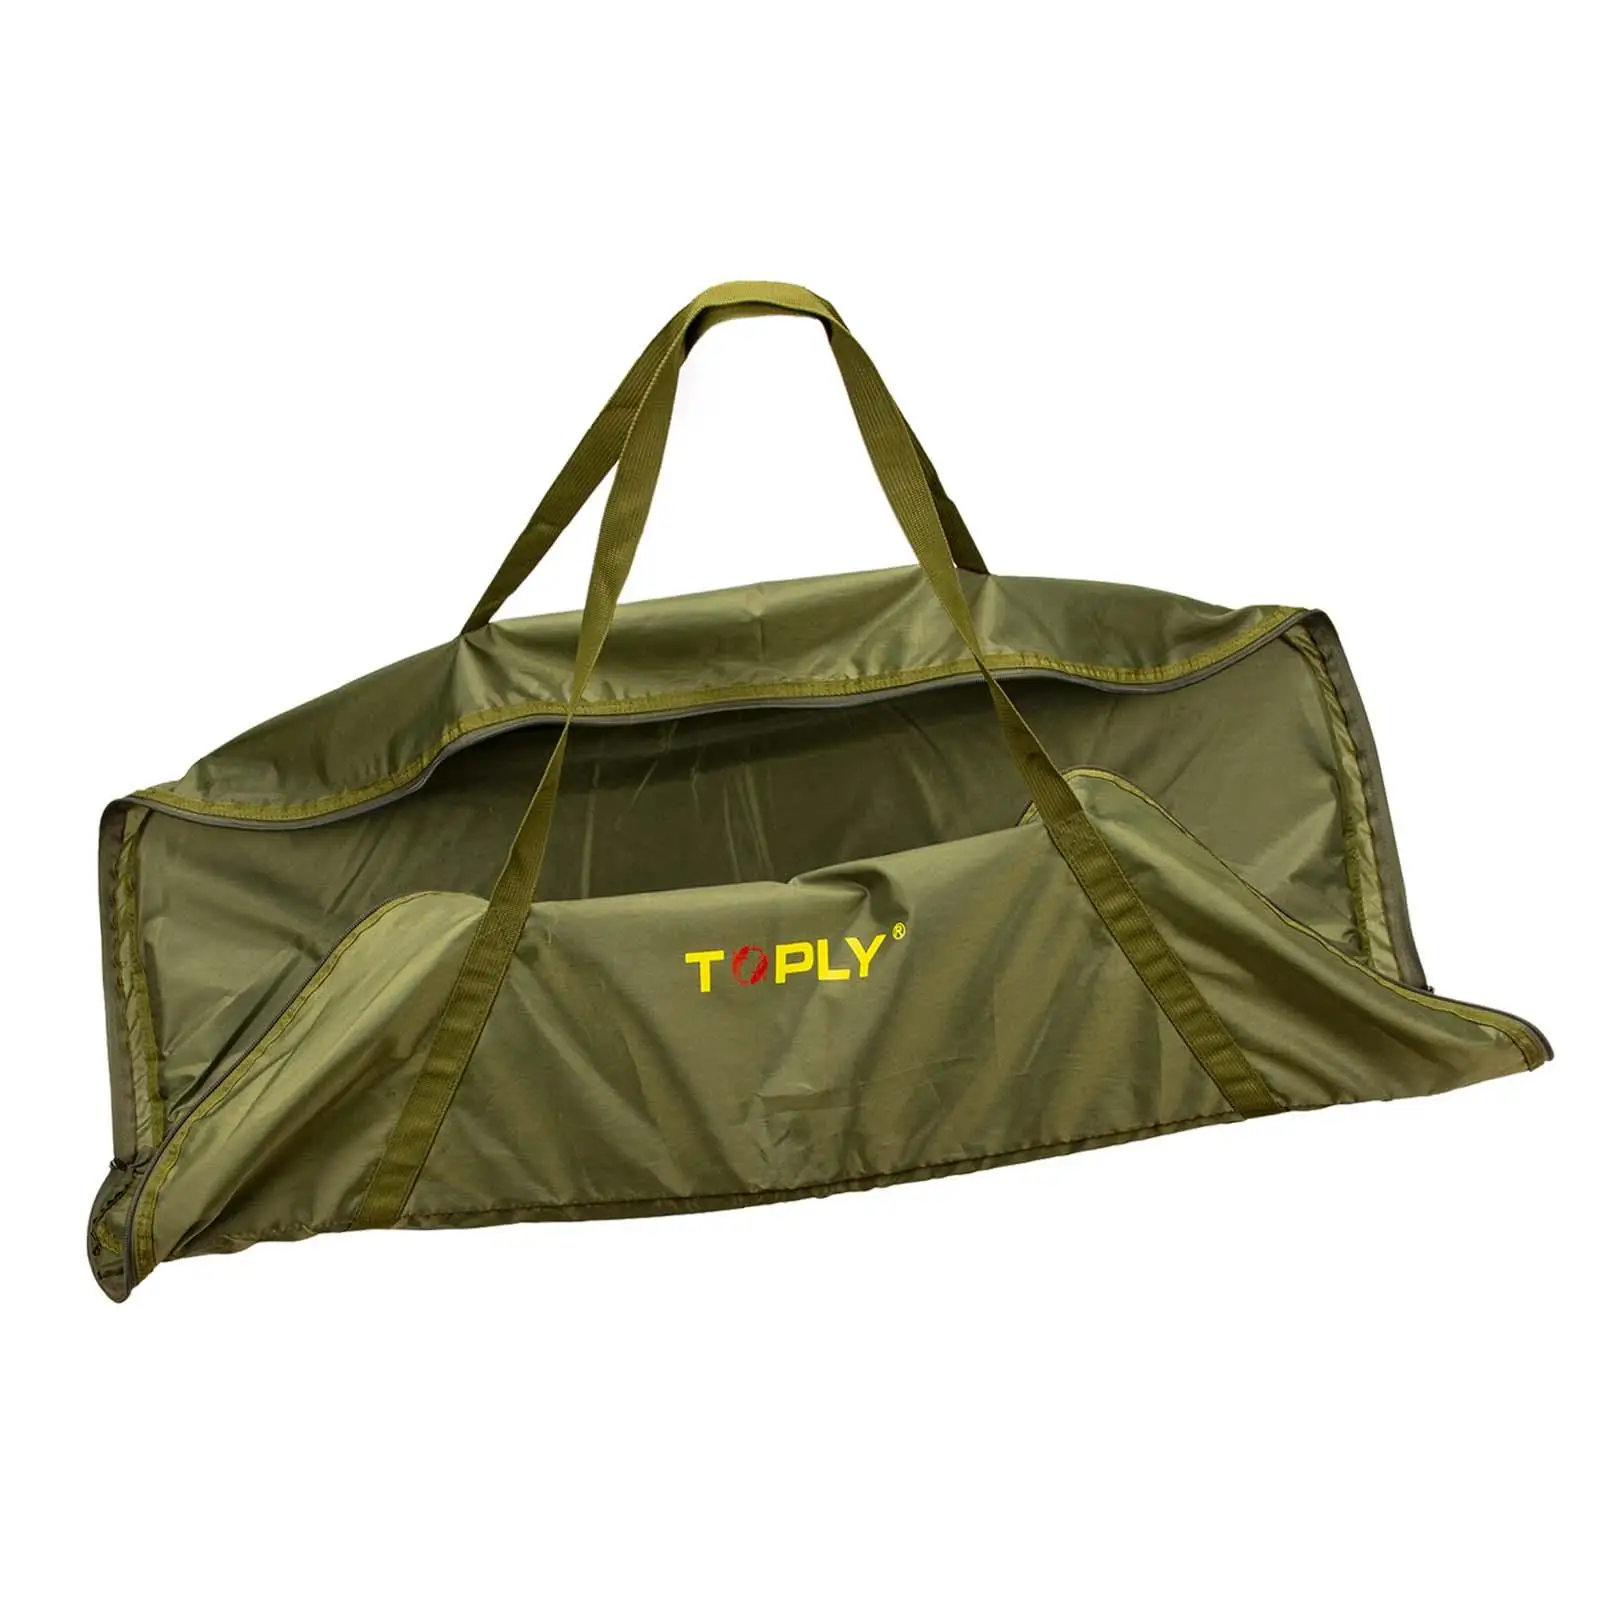 Fishing Cooler Bag Carry Handle Big Capacity Insulation Heavy Duty Fish Kill Bag for Picnic Travel Outdoor Activities Beach